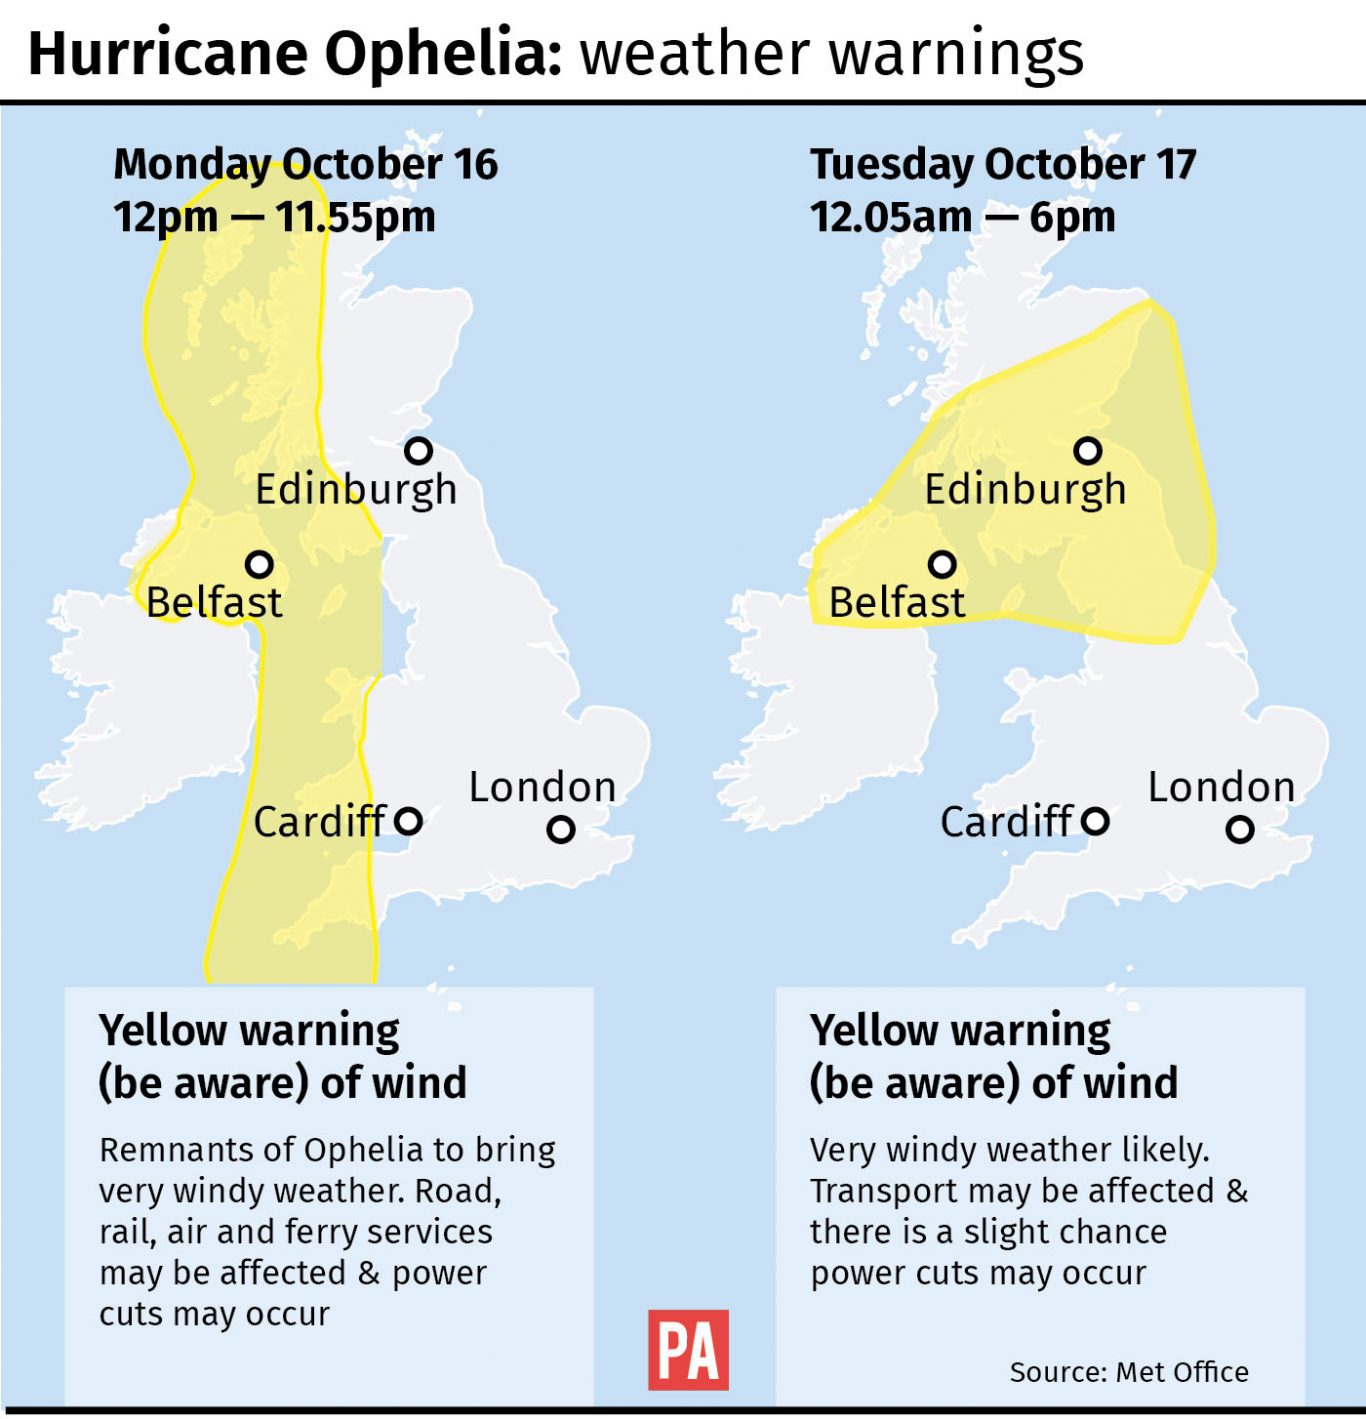 Graphic maps yellow warnings of wind from the Met Office